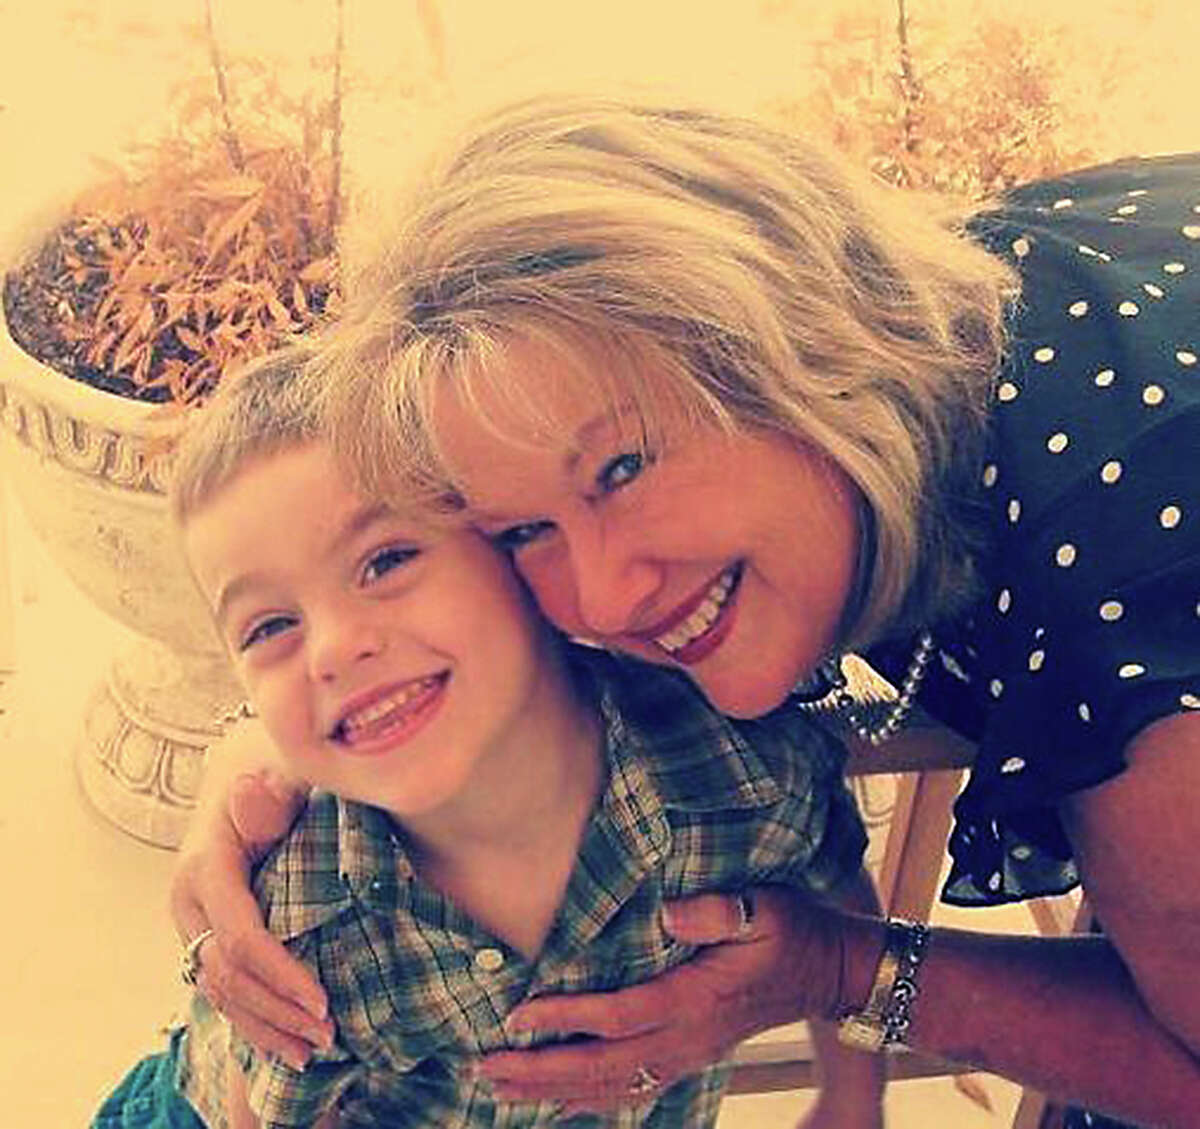 Candace Cormier and her son, Jeremiah, were described as inseparable. Their bodies were found last week in their home.